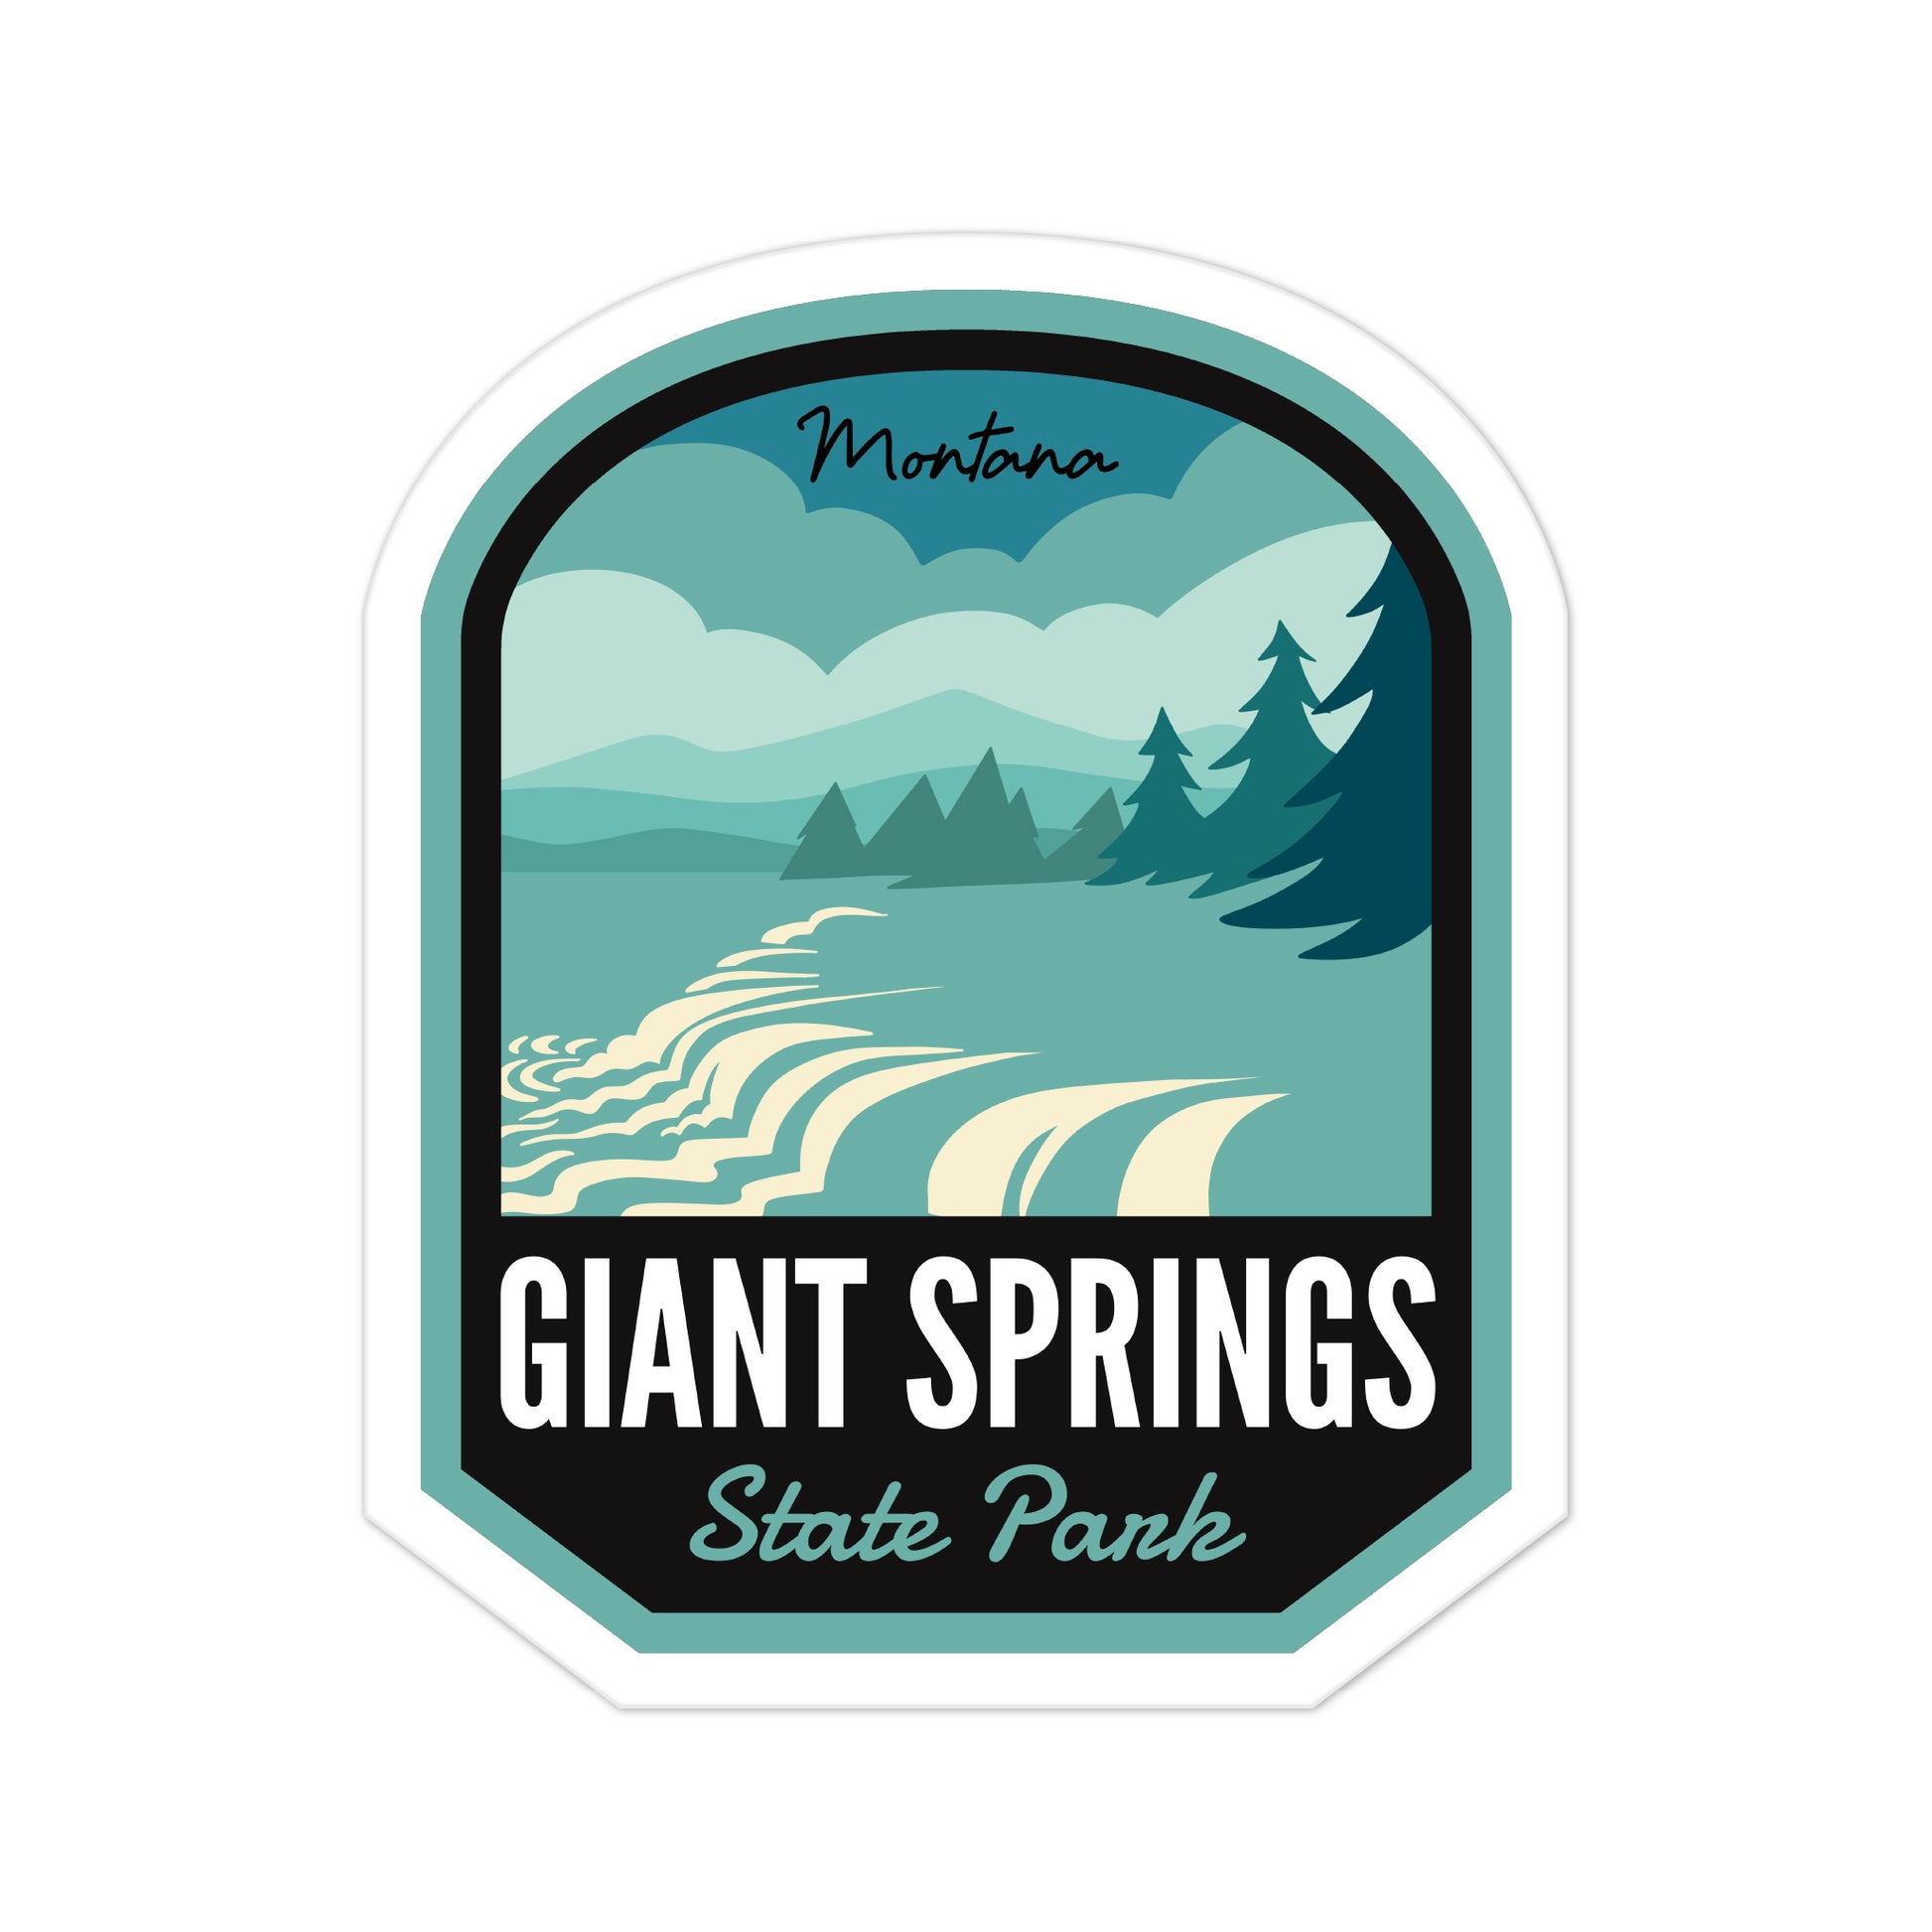 A sticker of Giant Springs State Park